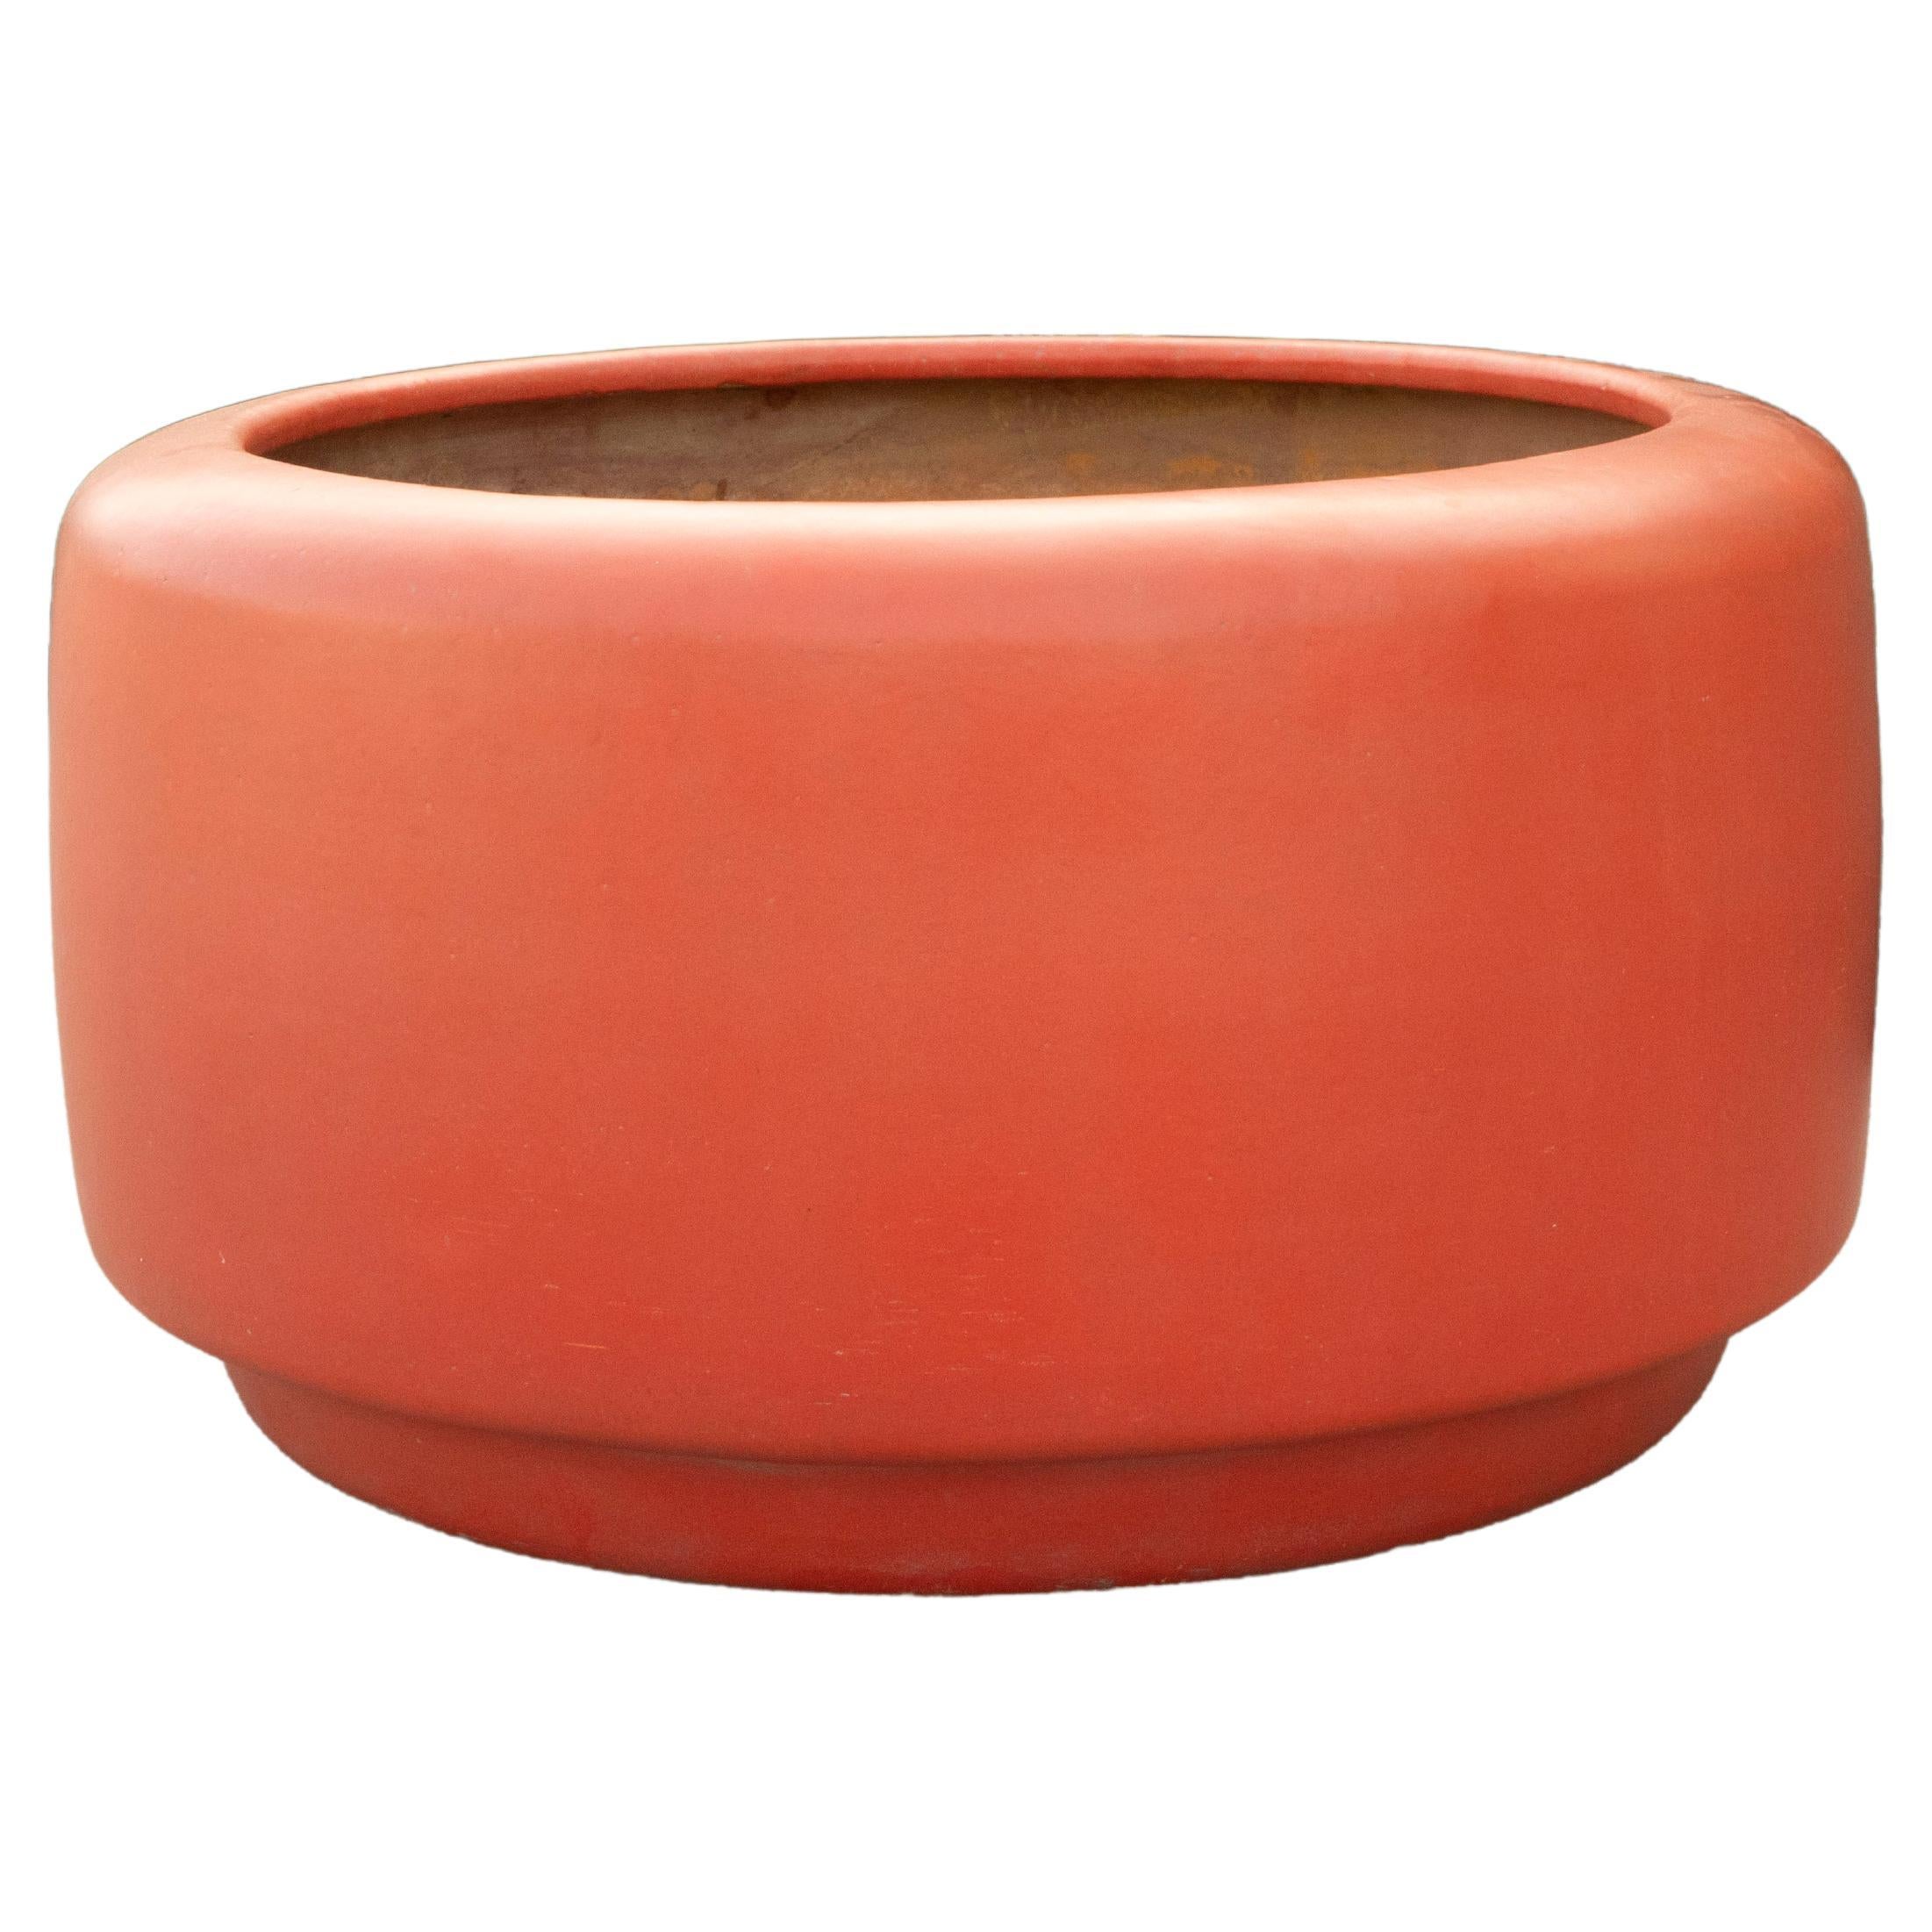 John Follis for Architectural Pottery CP-25 Tire Planter in Matte Red Glaze